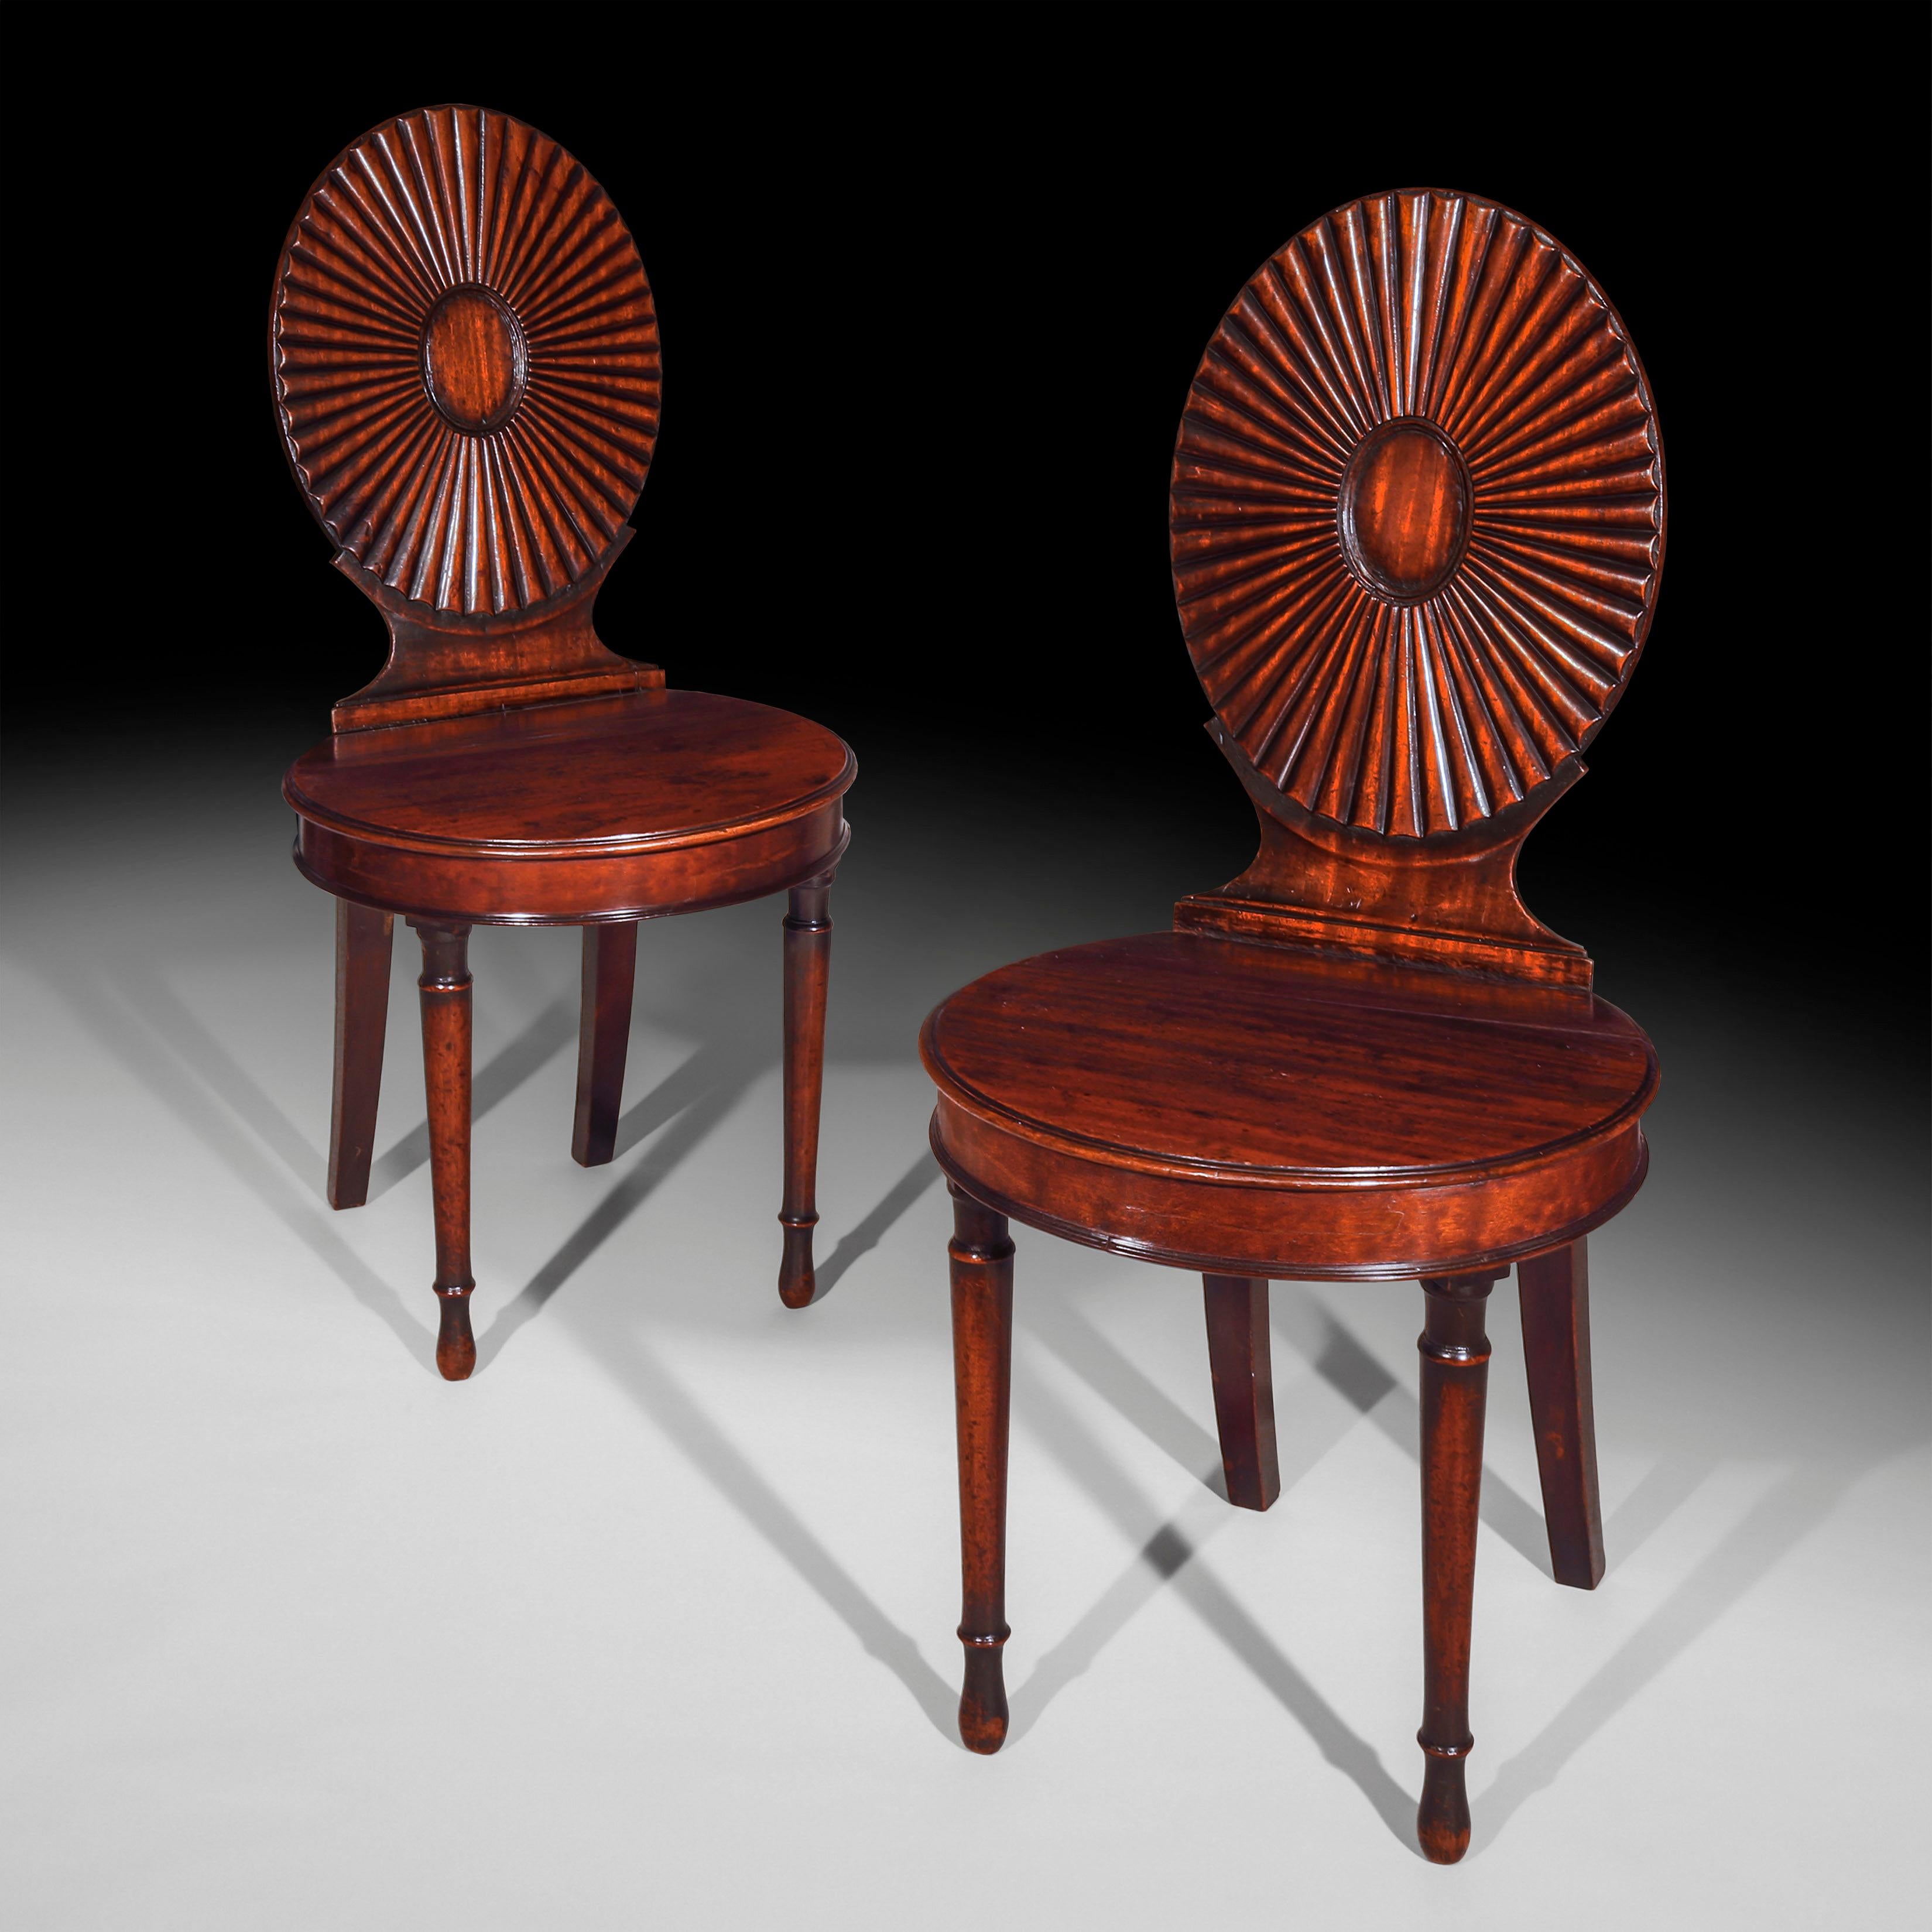 A very fine pair of late 18th century, George III period mahogany hall chairs of the rare neoclassical oval fan-back design, emblematic of the work of the London firm of William Ince and John Mayhew.

English, circa 1780.

Each having an oval